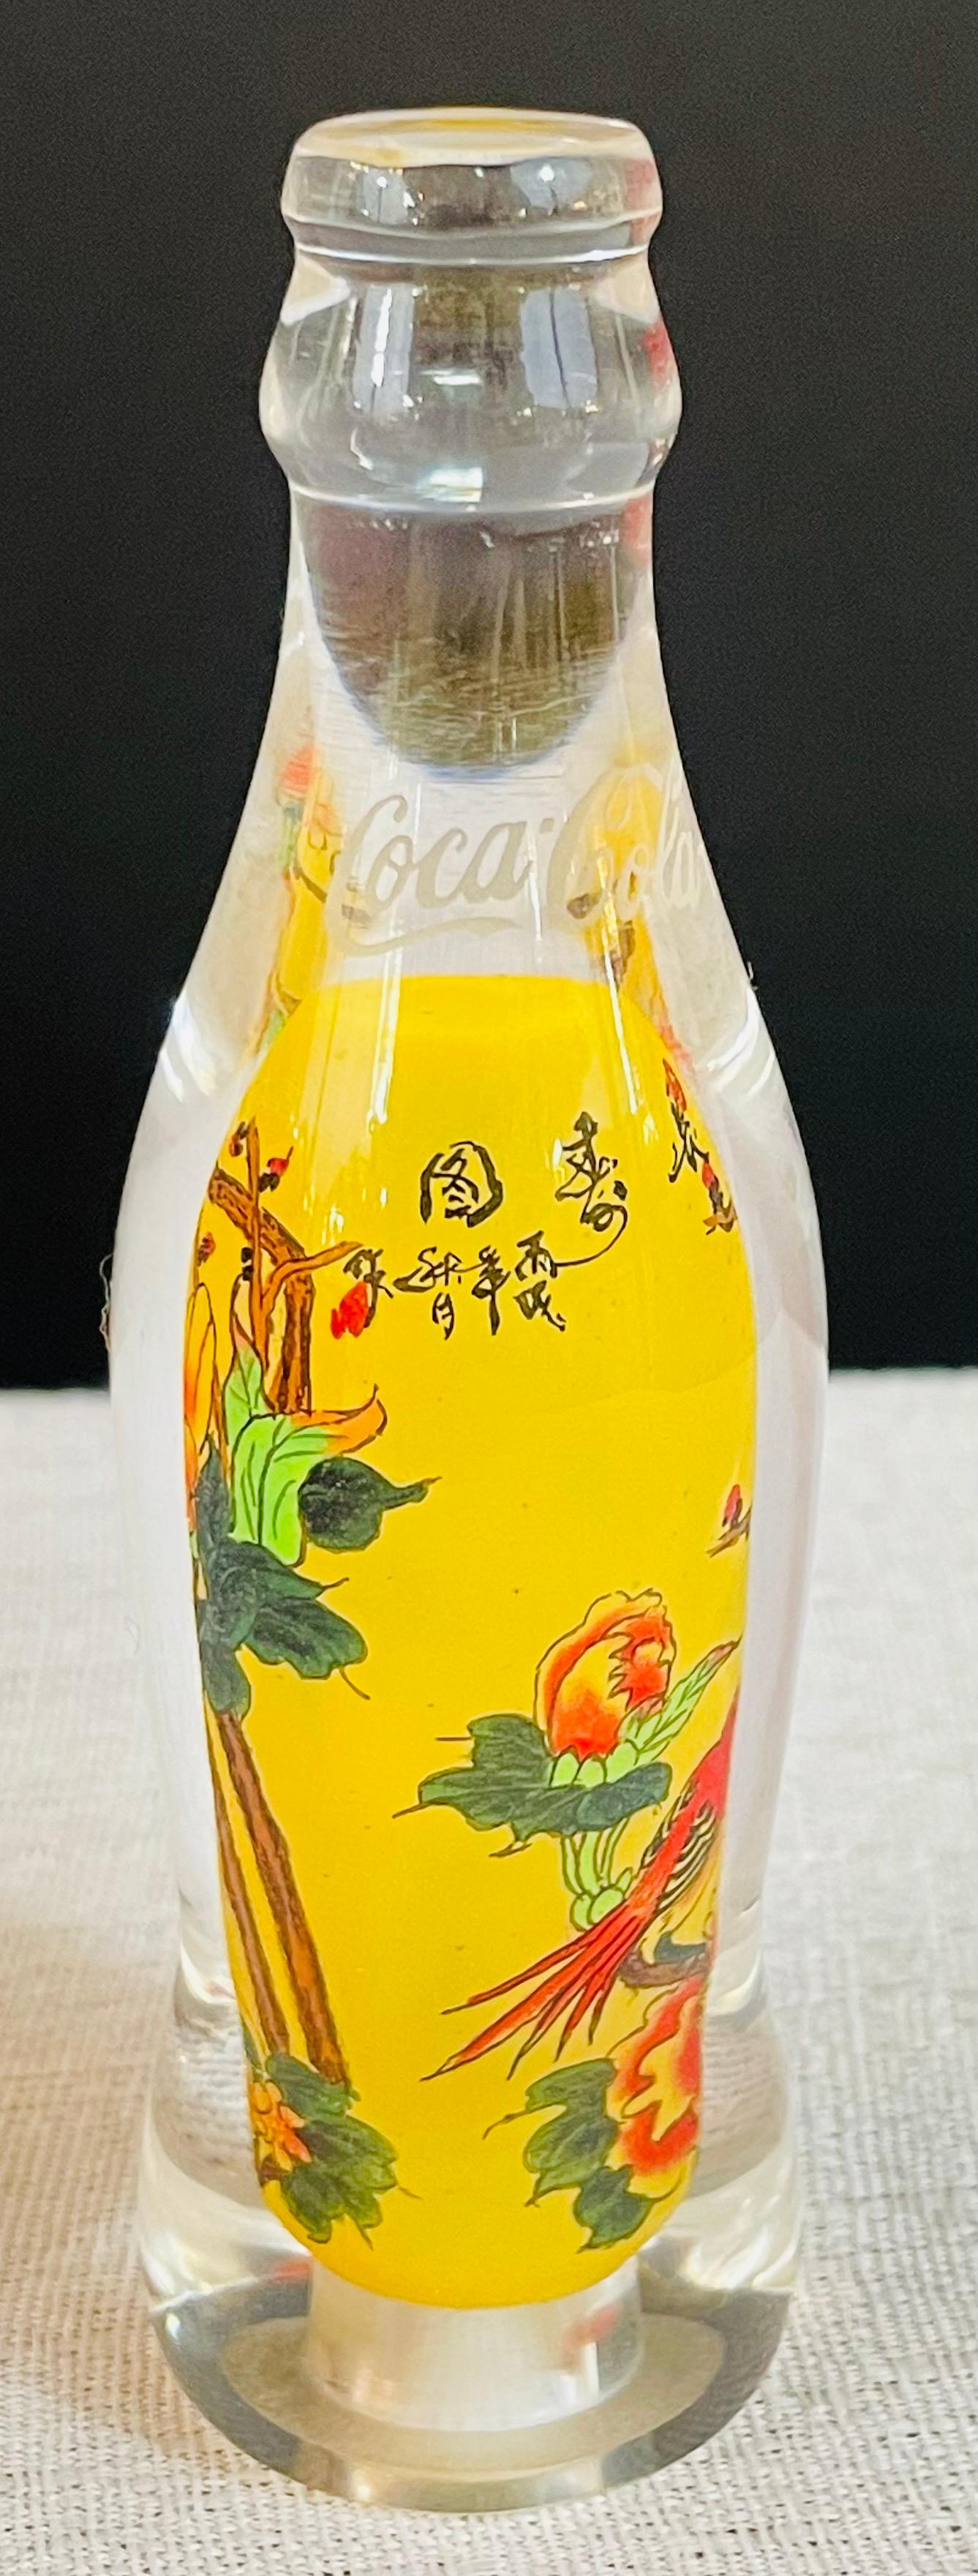 Collectible Coca-Cola Special Edition Asian Chinese Bottles, a Set of 5 For Sale 3